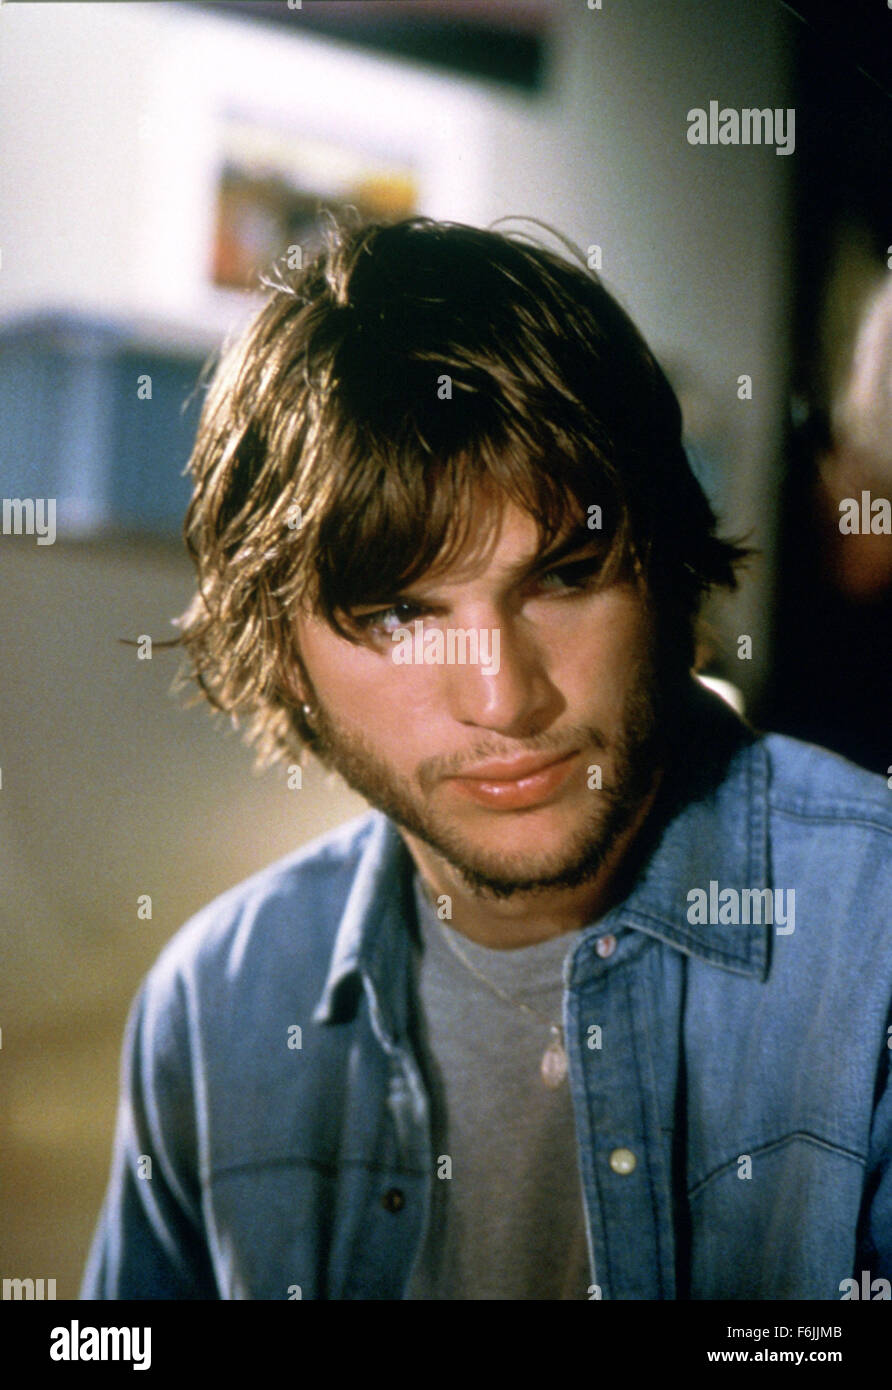 RELEASE DATE: January 23, 2004. MOVIE TITLE: The Butterfly Effect. STUDIO: BenderSpink. PLOT: A young man blocks out harmful memories of significant events of his life. As he grows up, he finds a way to remember these lost memories and a supernatural way to alter his life. PICTURED: ASHTON KUTCHER star as Evan Treborn. Stock Photo